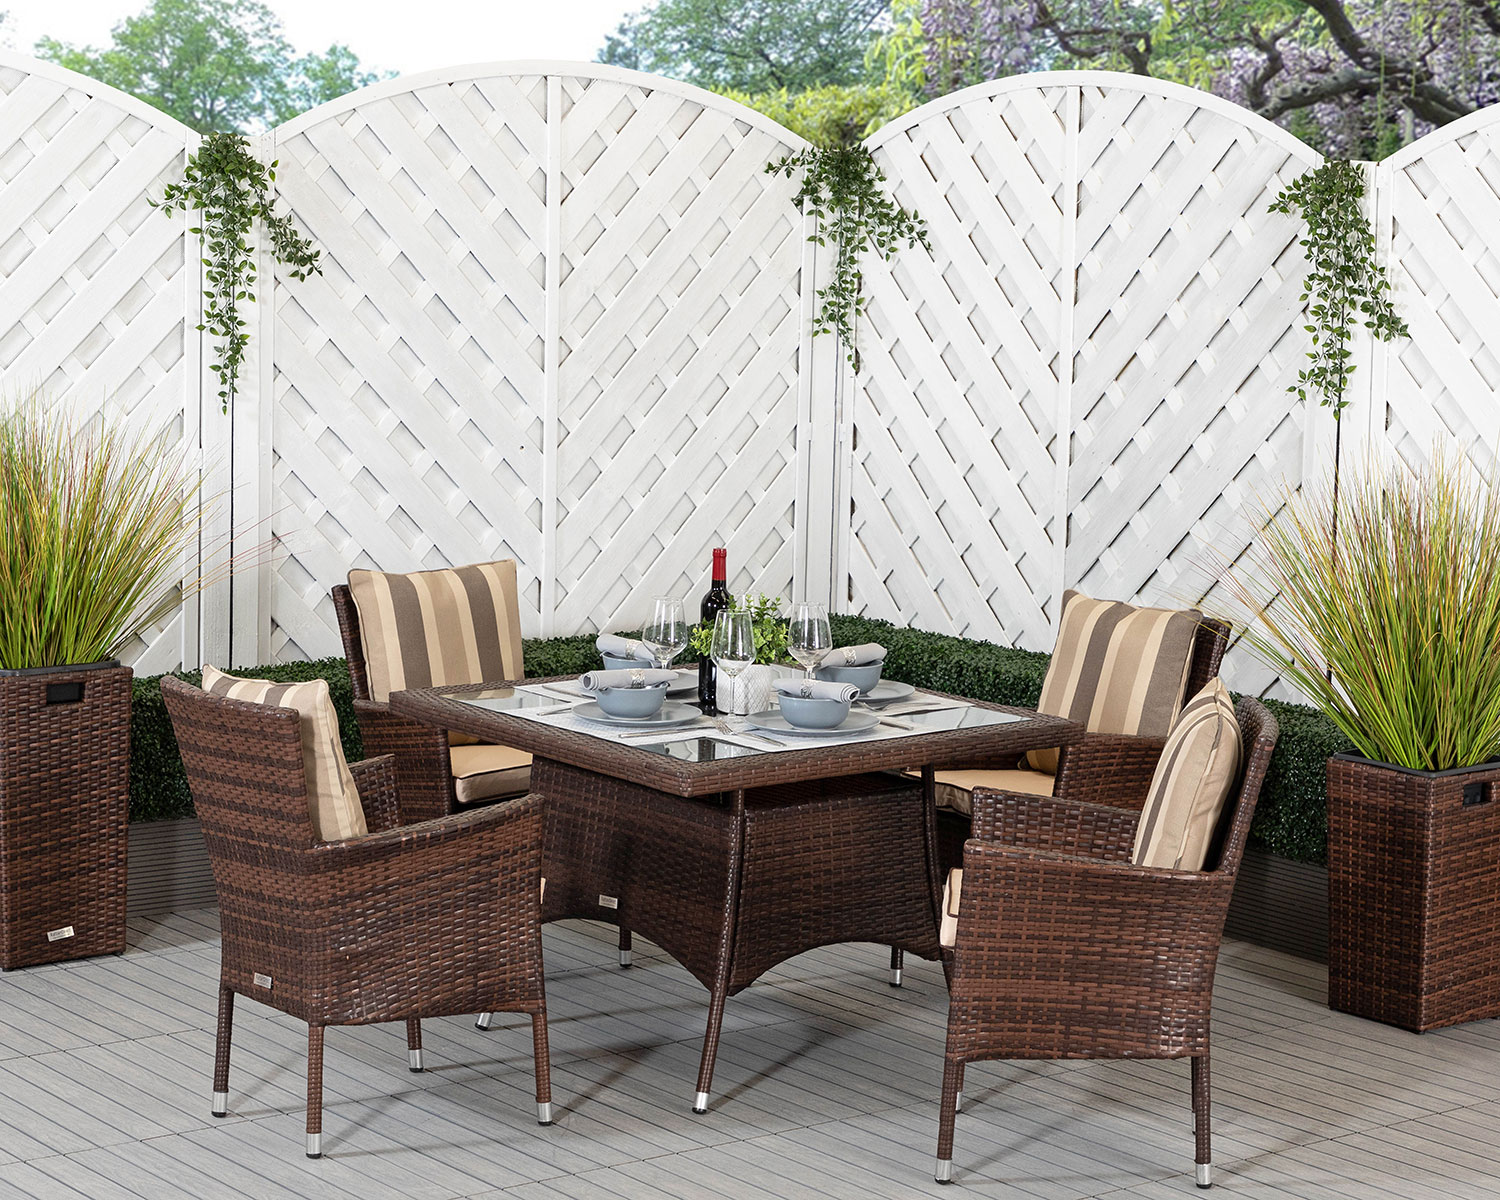 4 Seat Rattan Garden Dining Set With Square Dining Table In Brown Cambridge Rattan Direct